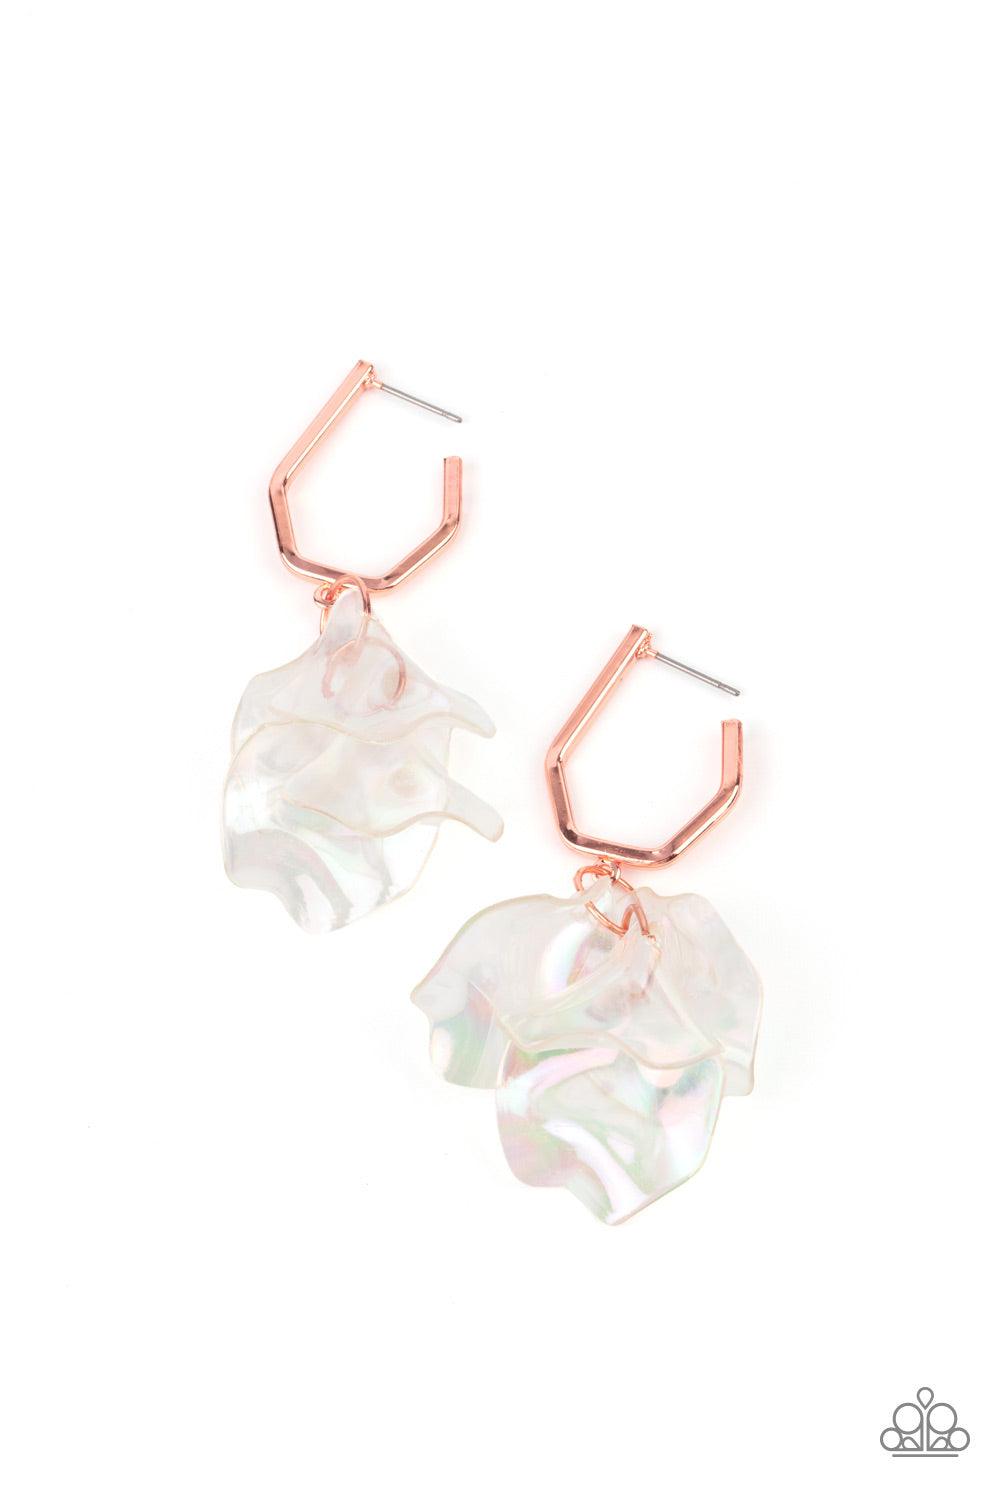 Paparazzi Accessories Jaw-Droppingly Jelly - Copper A cluster of iridescent acrylic petals swing from the bottom of a dainty shiny copper geometric hoop, creating an ethereal edge. Earring attaches to a standard post fitting. Hoop measures approximately 1